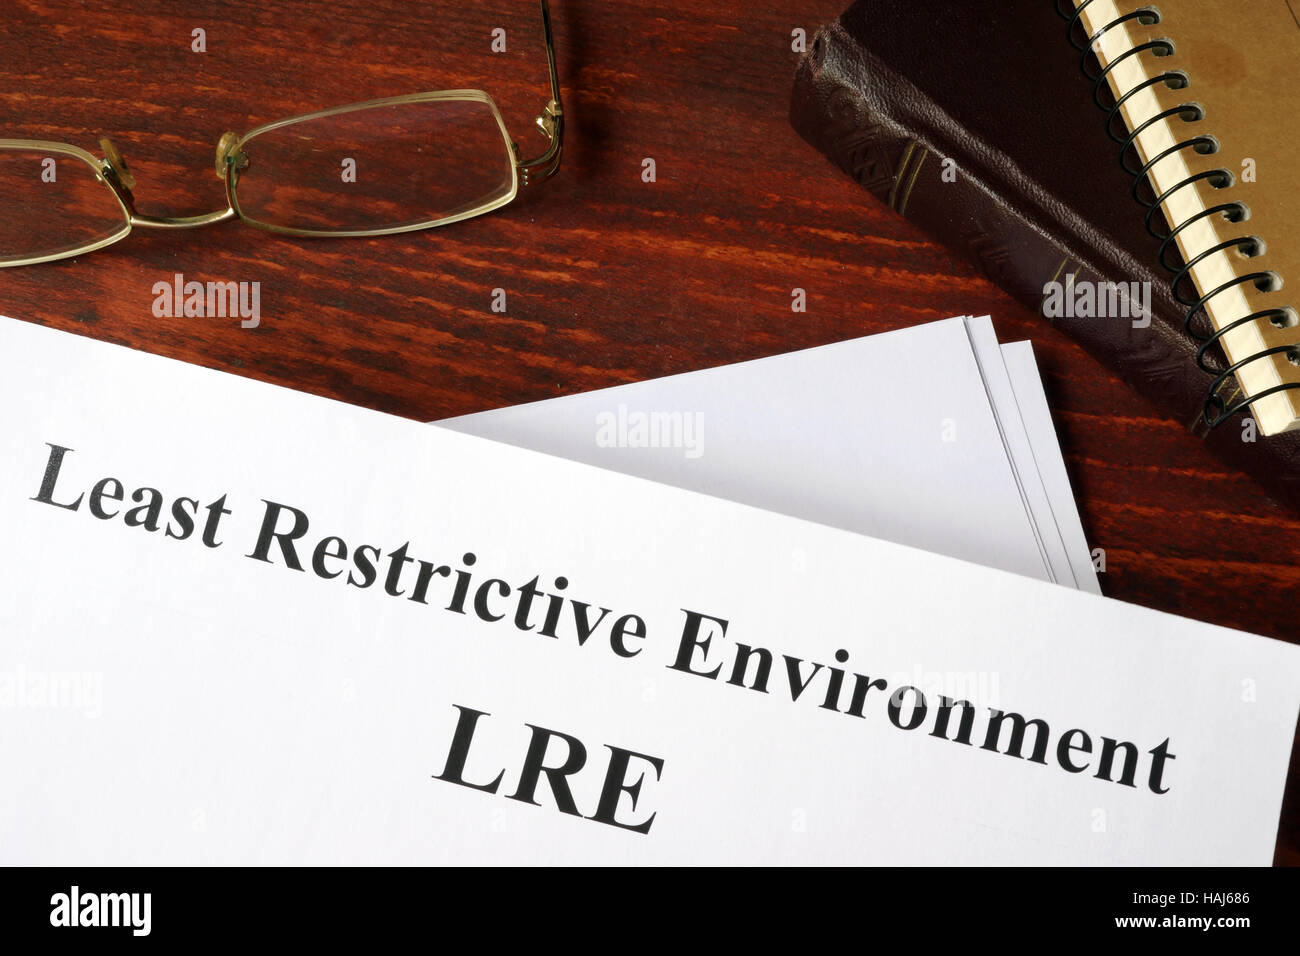 Paper with title Least restrictive environment LRE. Stock Photo